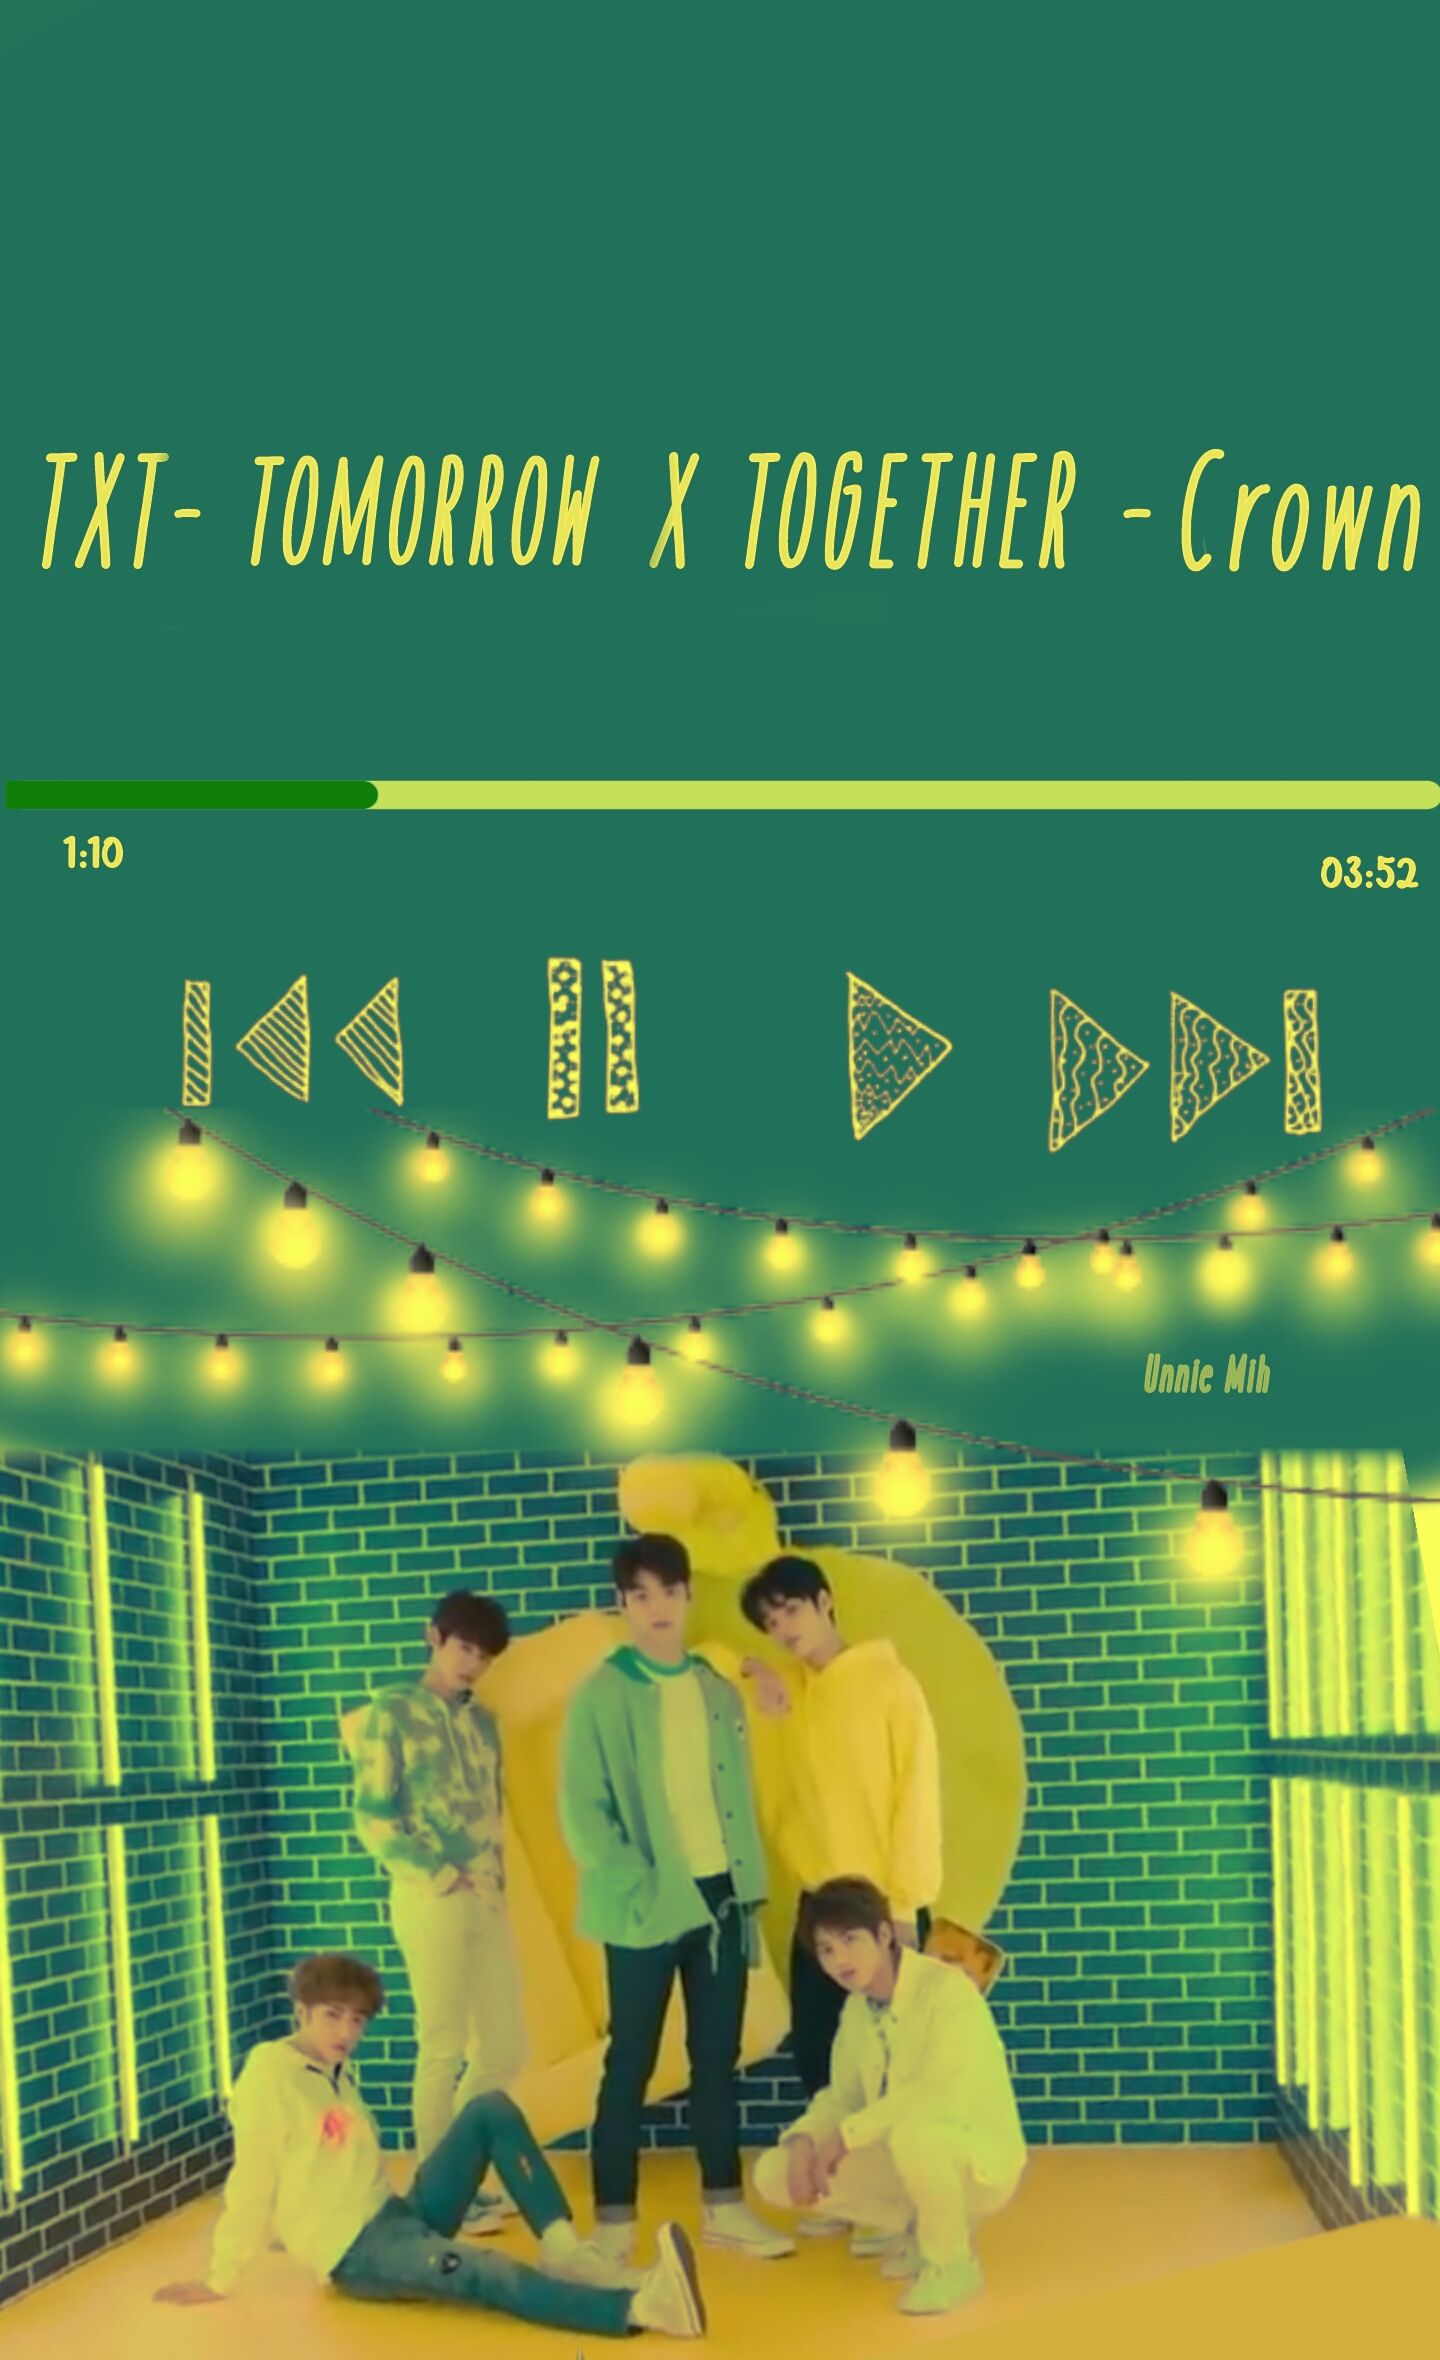 Wallpaper txt! Loved debut #txt #txt_tomorrow_x_together #Crown #bighit #debut #aesthetic #yellow #green. Txt, Kpop wallpaper, Green aesthetic